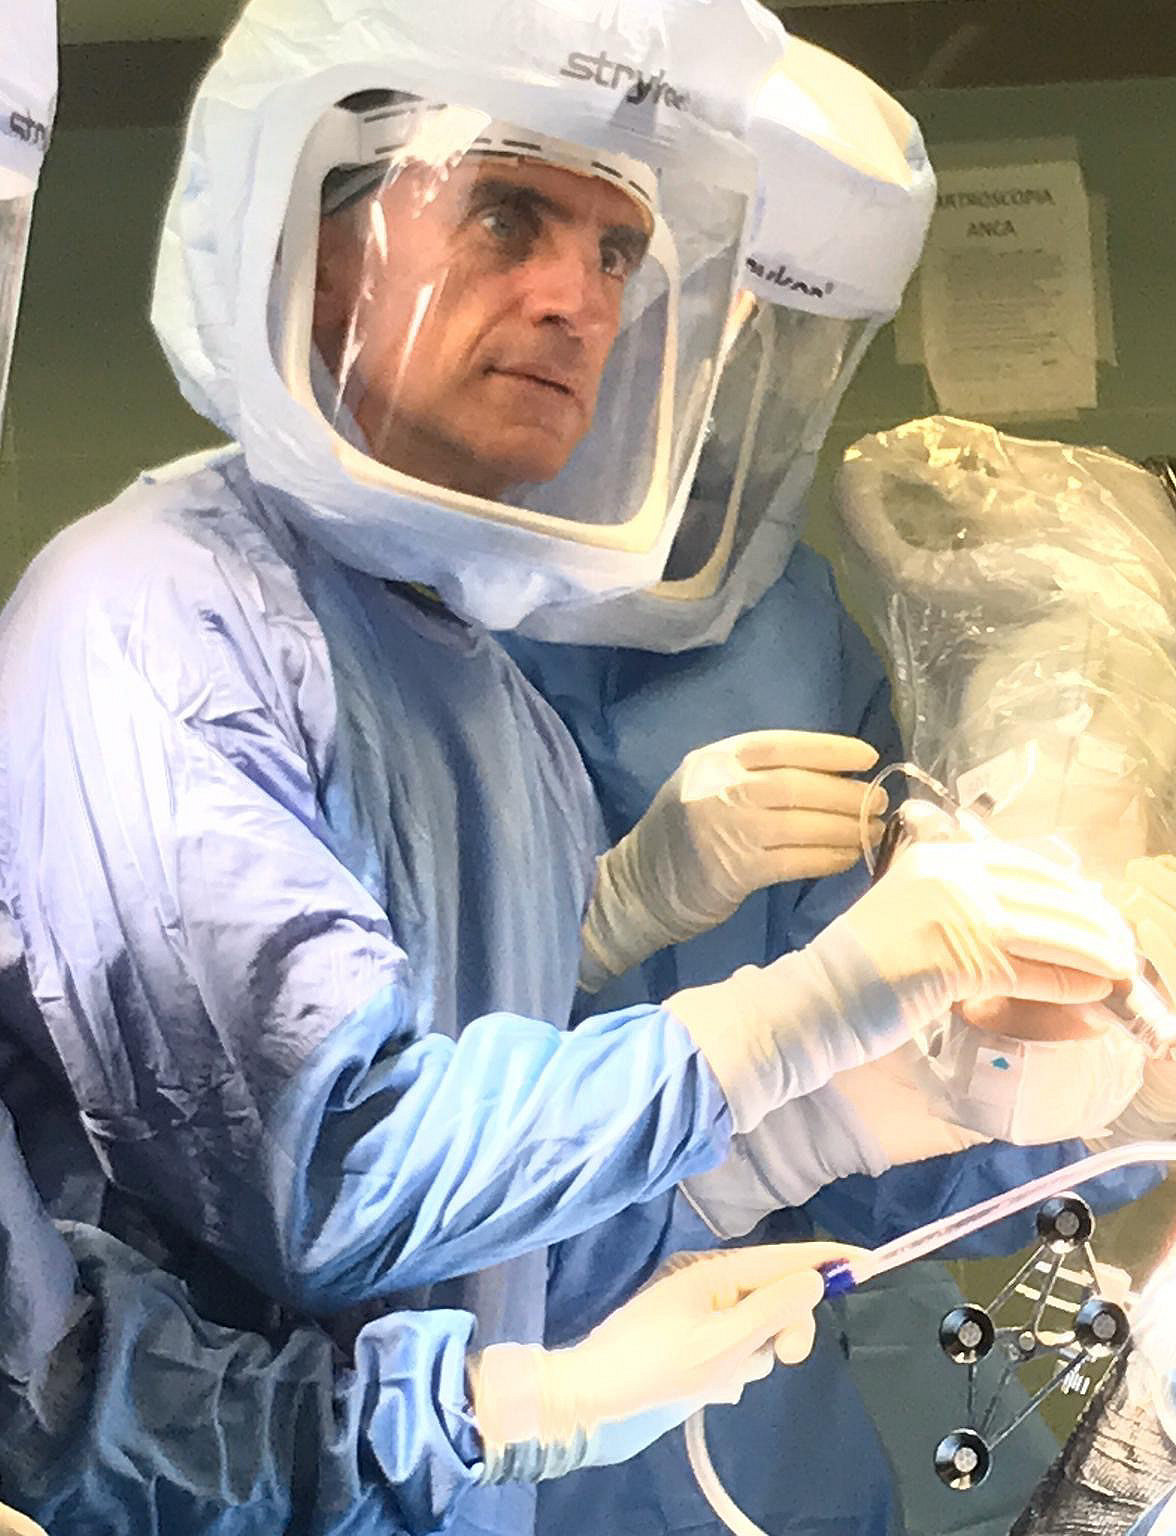 Dr Dusing - Orthopaedic Surgeon - PPE Board